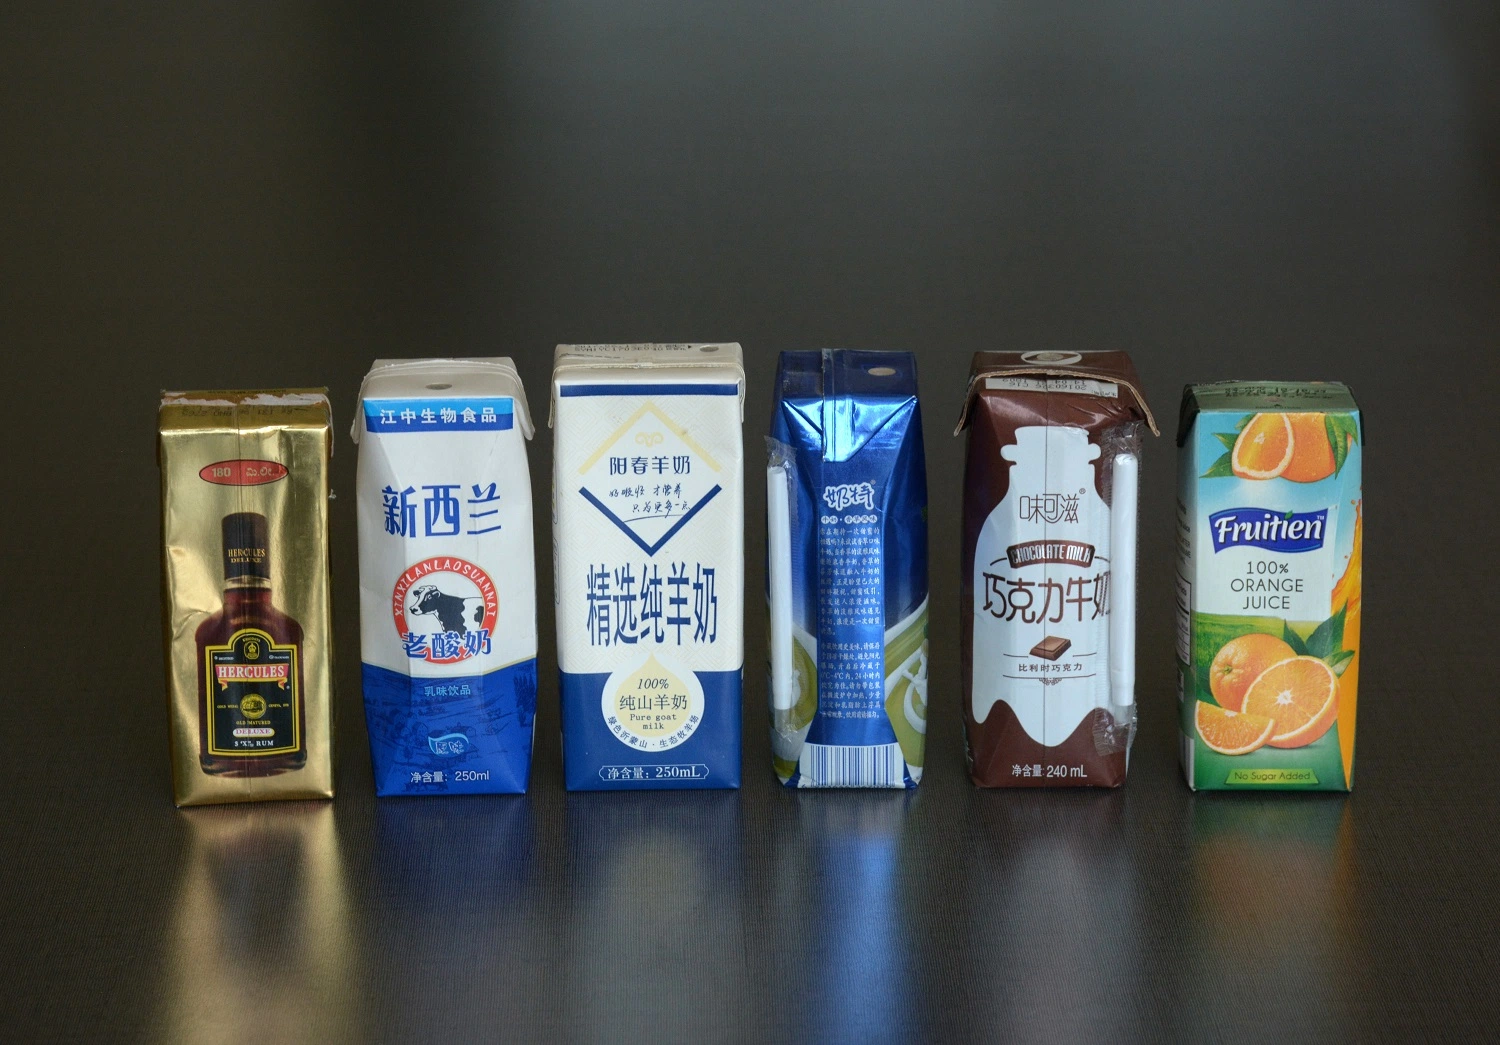 Aseptic Packing Cartons for Coconut/Milk/Juice/Tea/Beverage/Drinks/Alcohol-Gable Top Box/Liquid Packaging with Caps